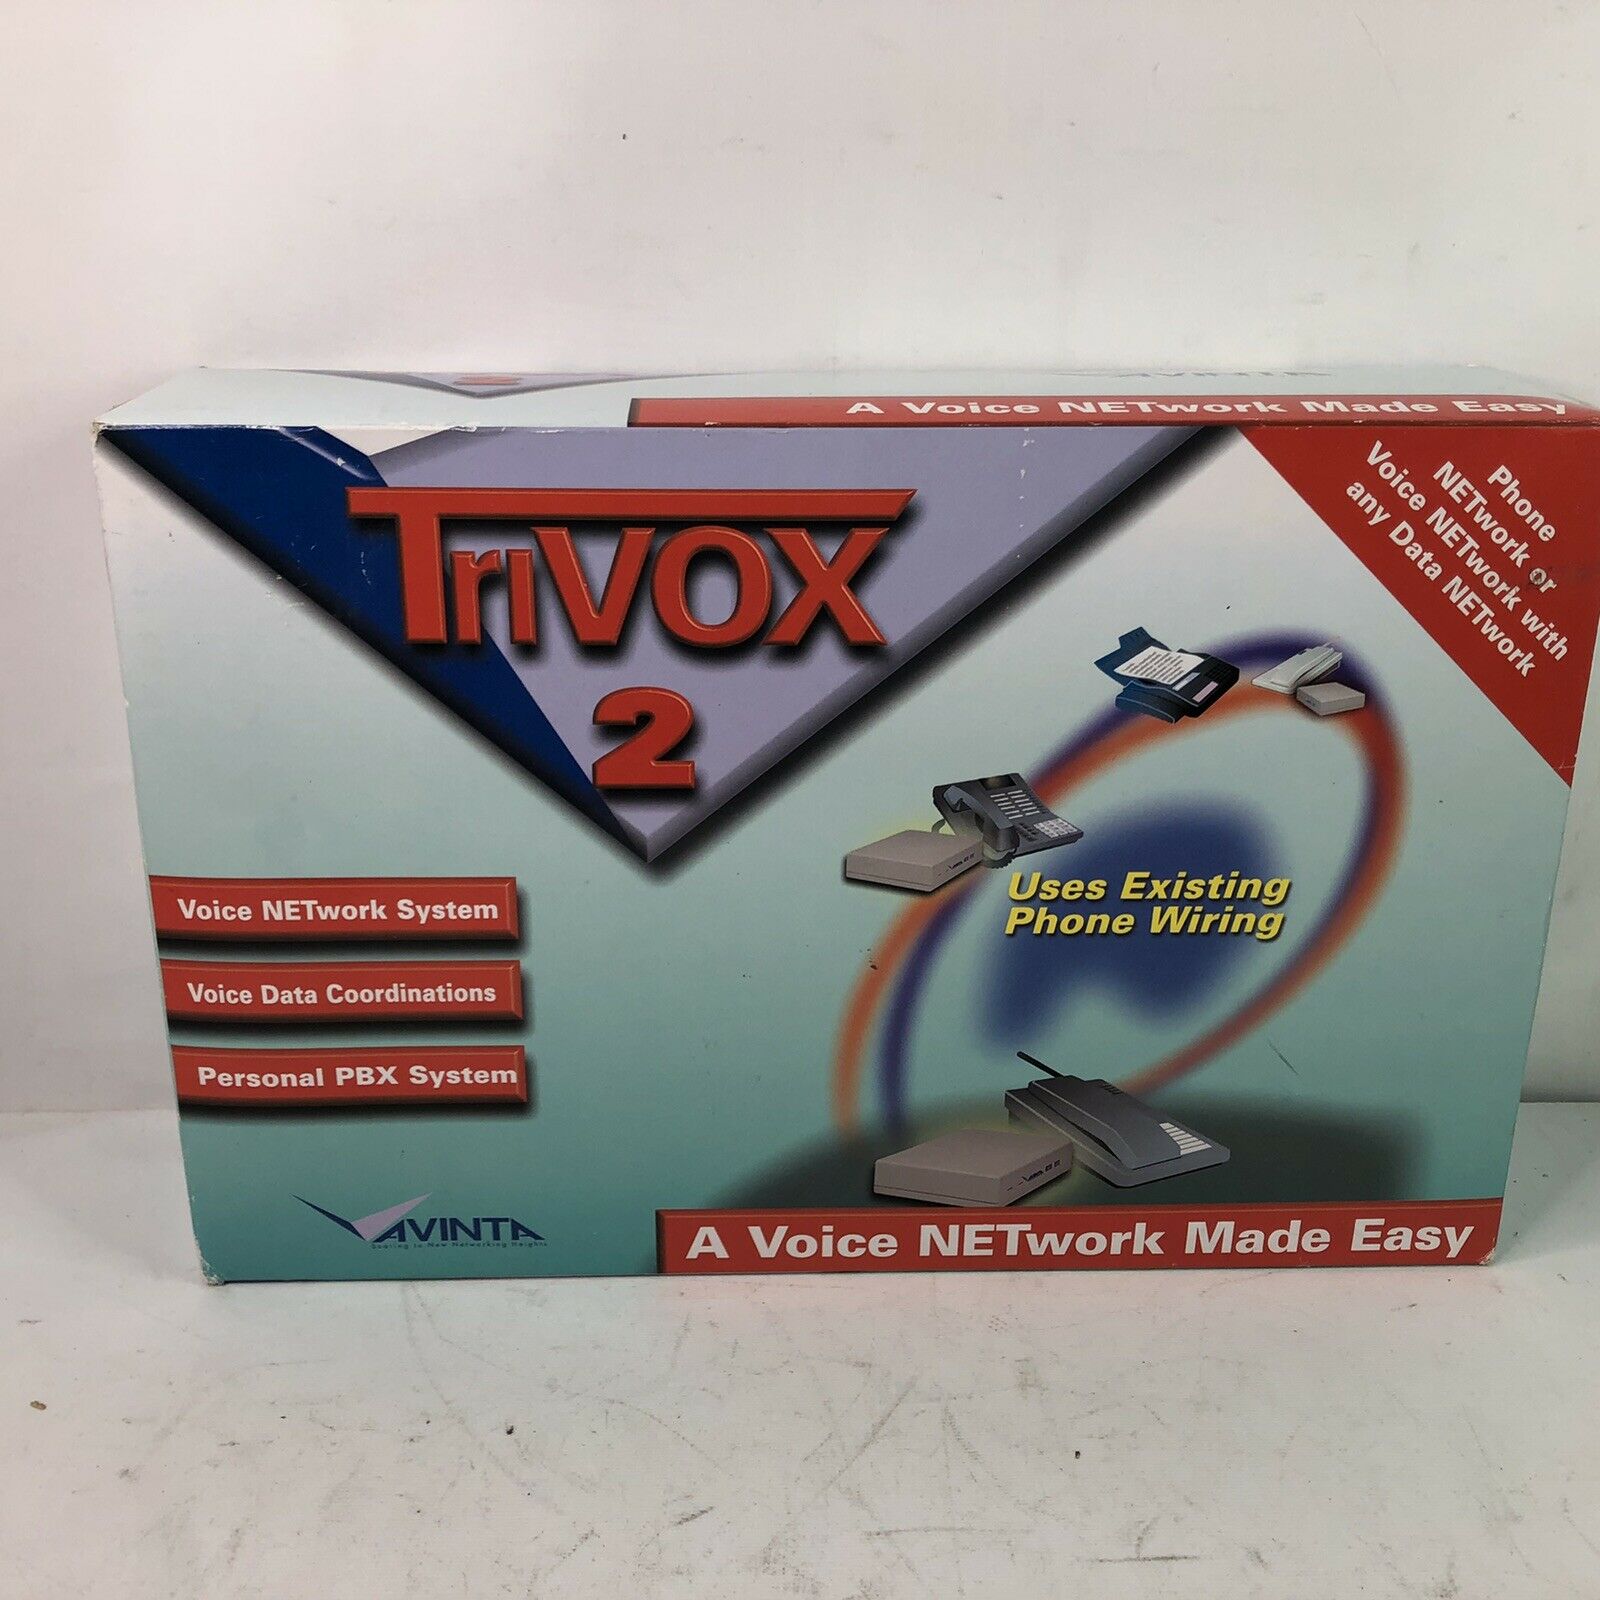 Avinta Trivox 2 Phone Or Voice Network With Any Data Network